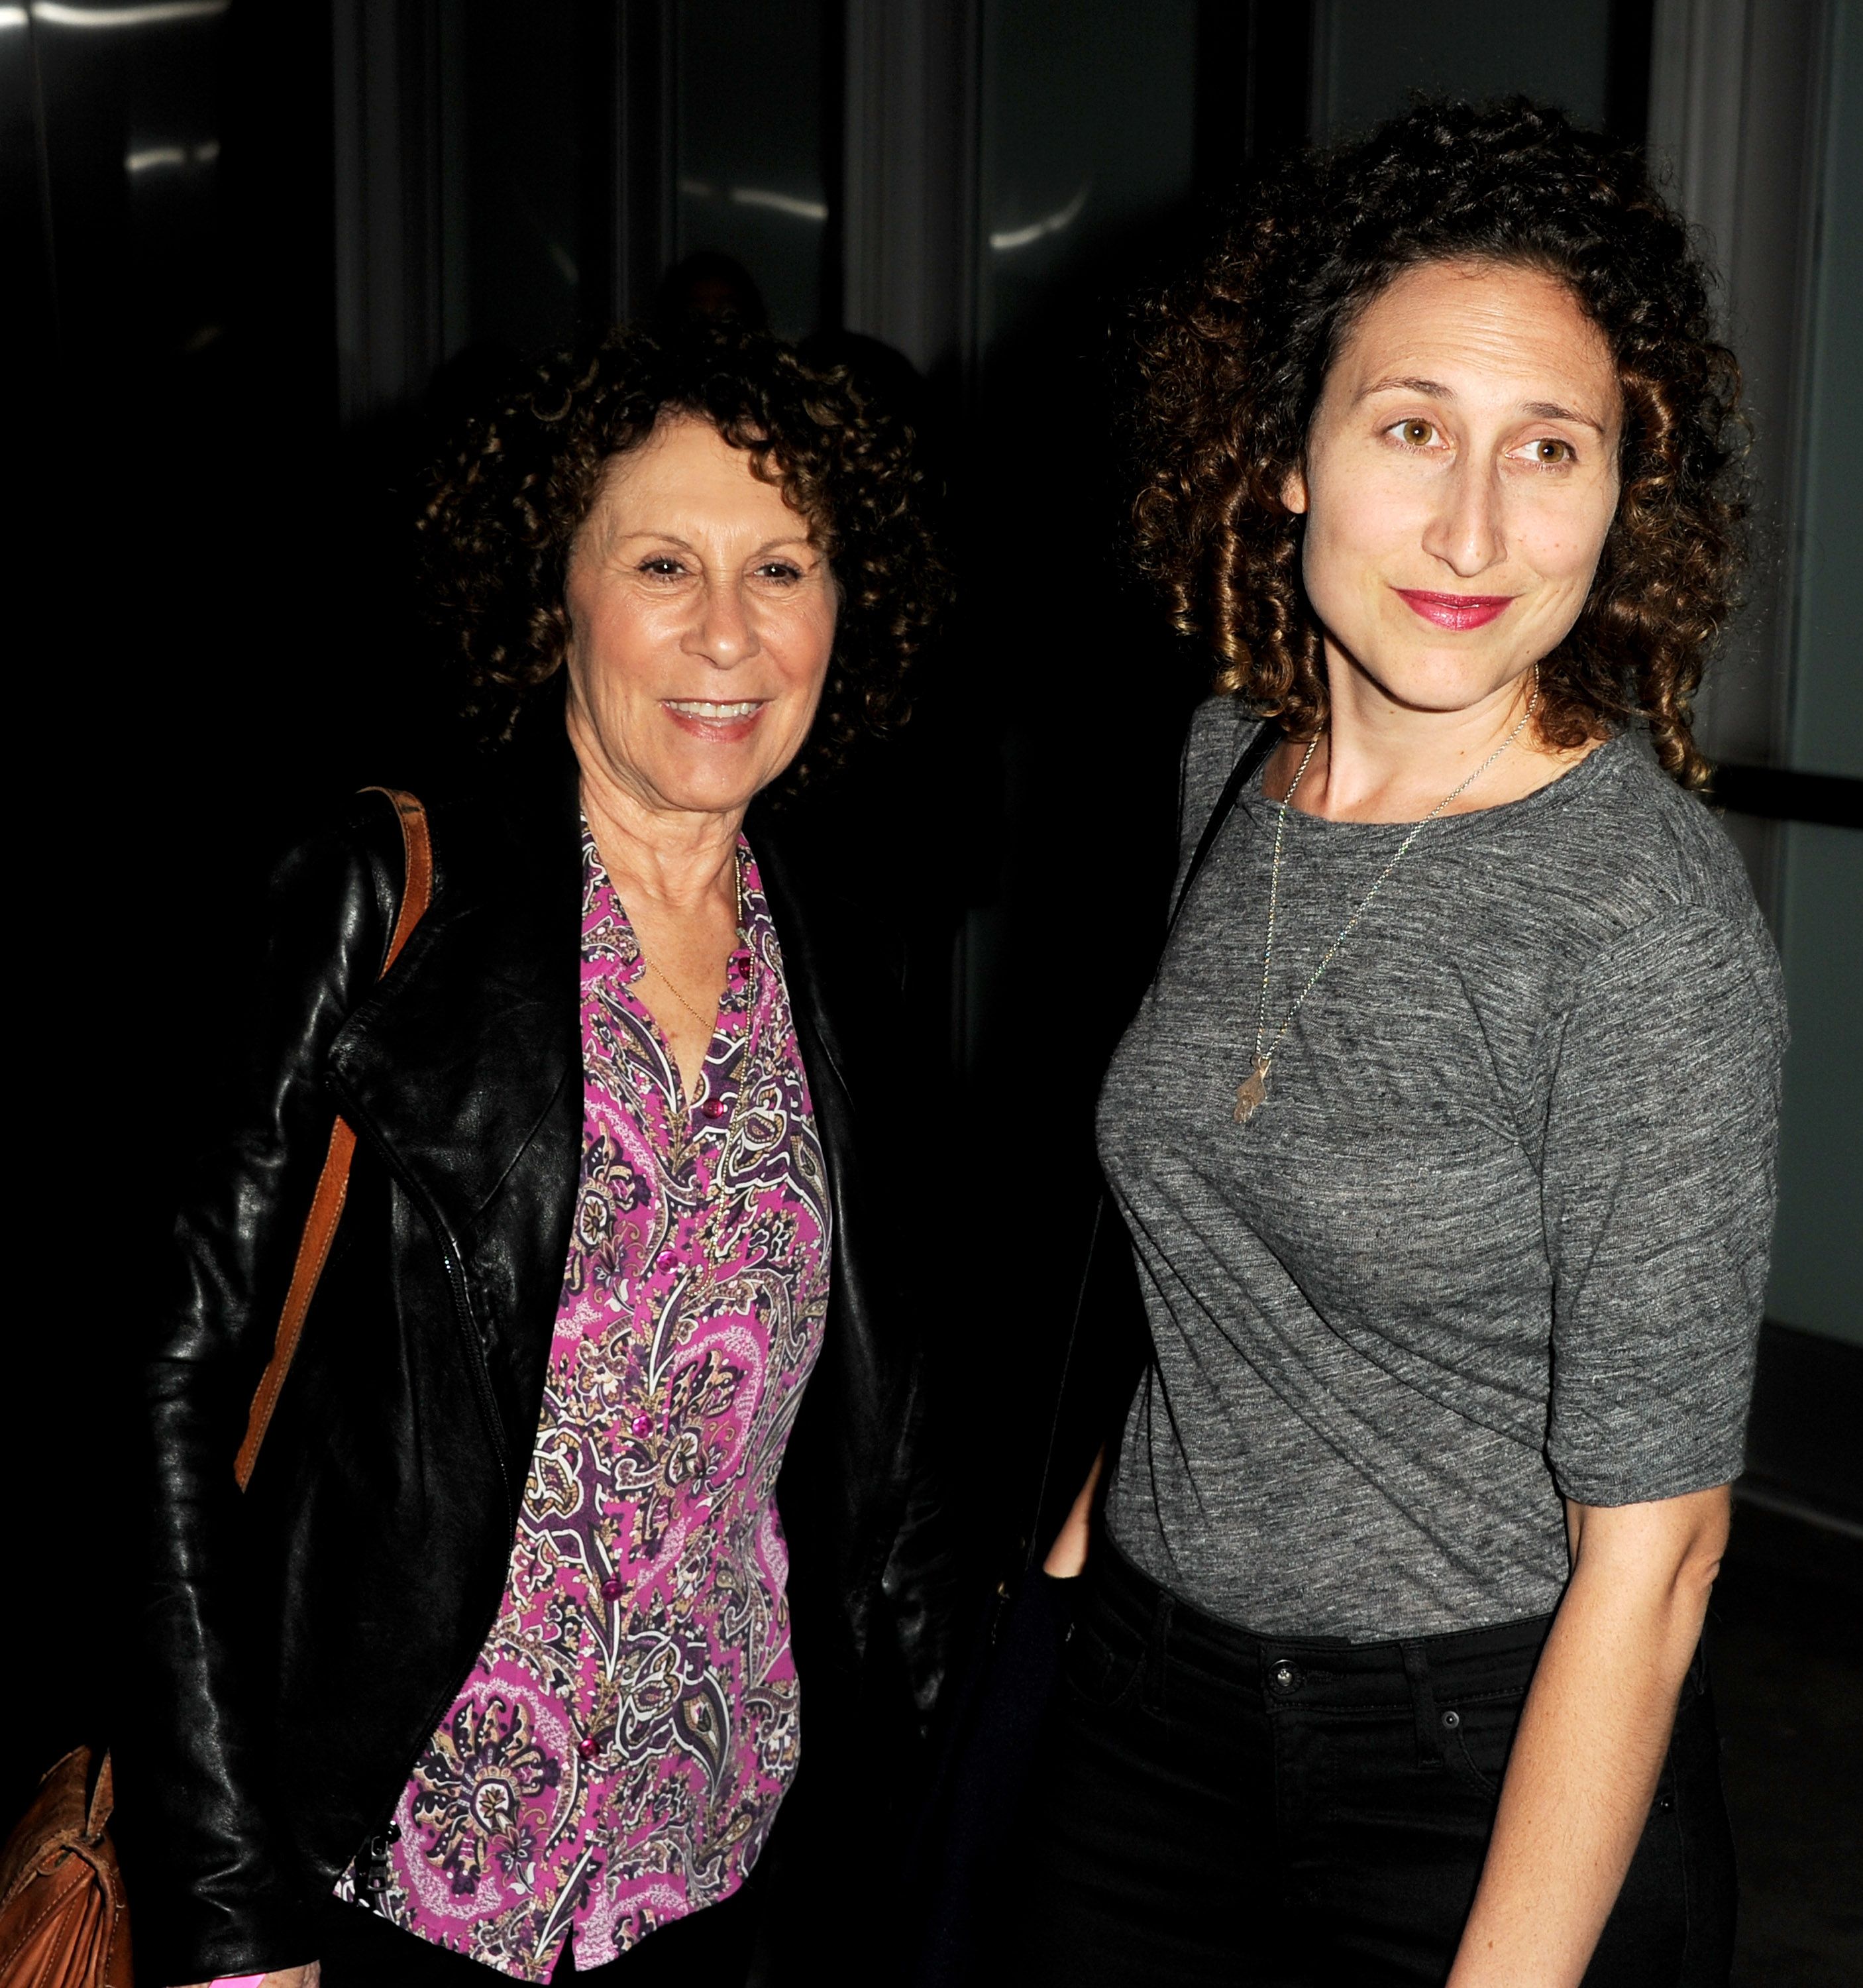 Rhea Perlman and Grace Fan DeVito during the screening of XLrator Media's "CBGB" at the Arclight Theatre on October 1, 2013 in Los Angeles, California. | Source: Getty Images